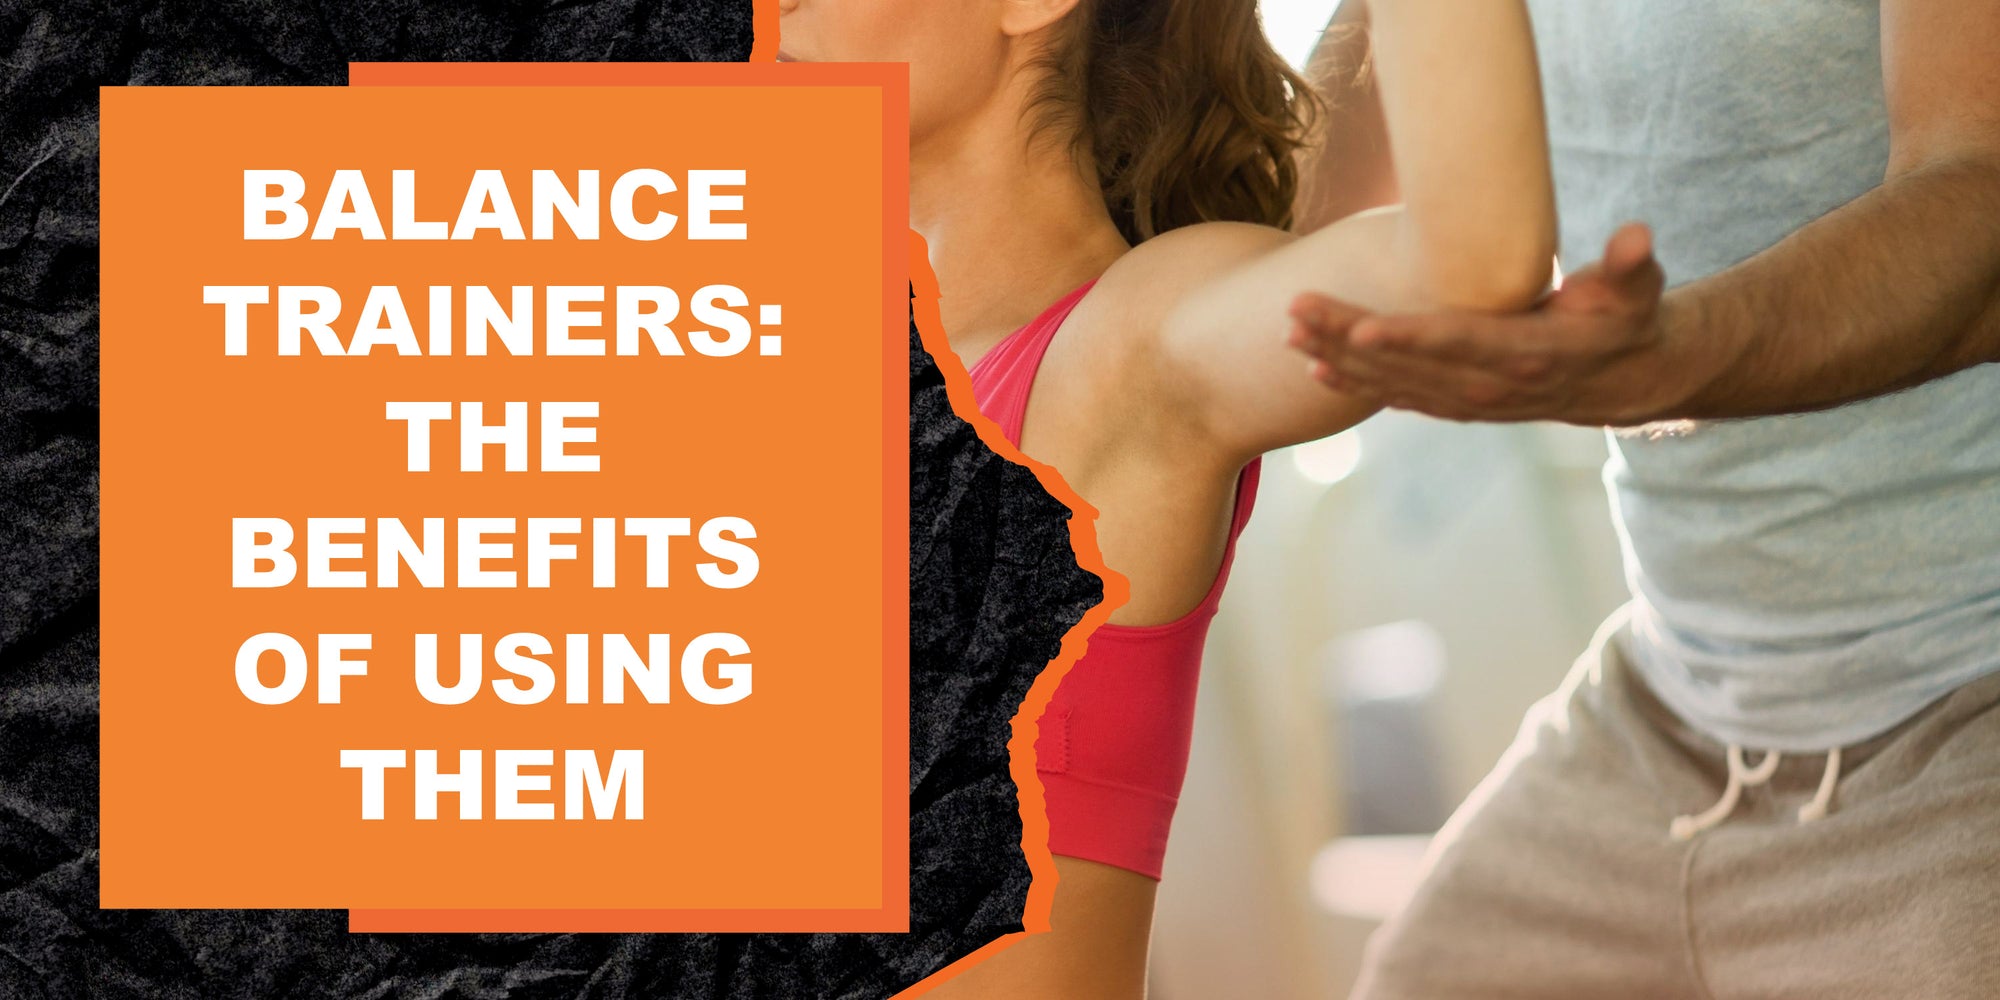 Balance Trainers: The Benefits of Using Them